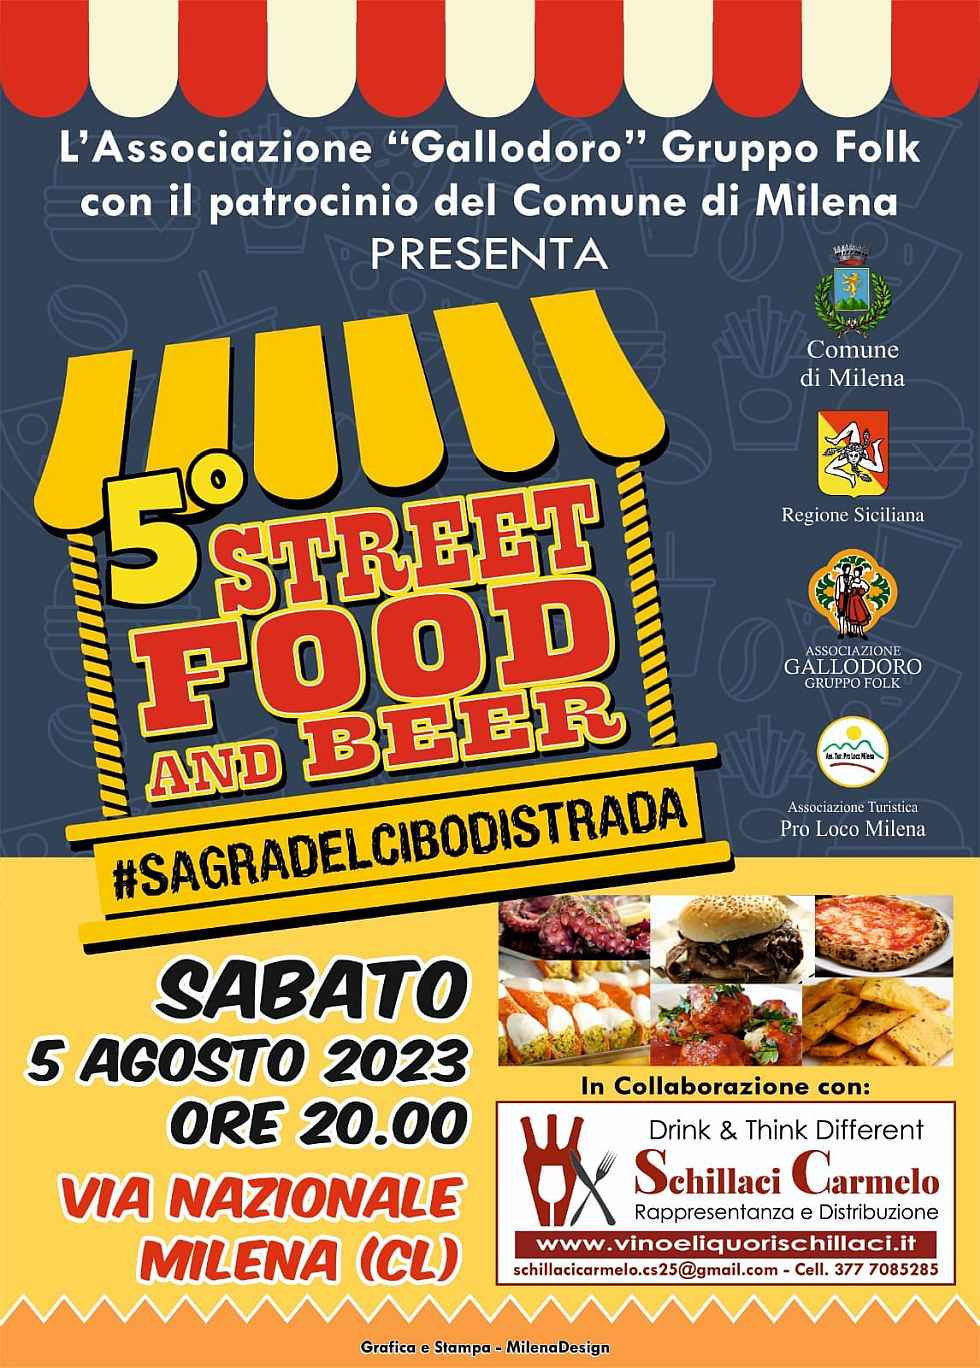 Milena (CL)
"4° Street Food and Beer"
5 Agosto 2022